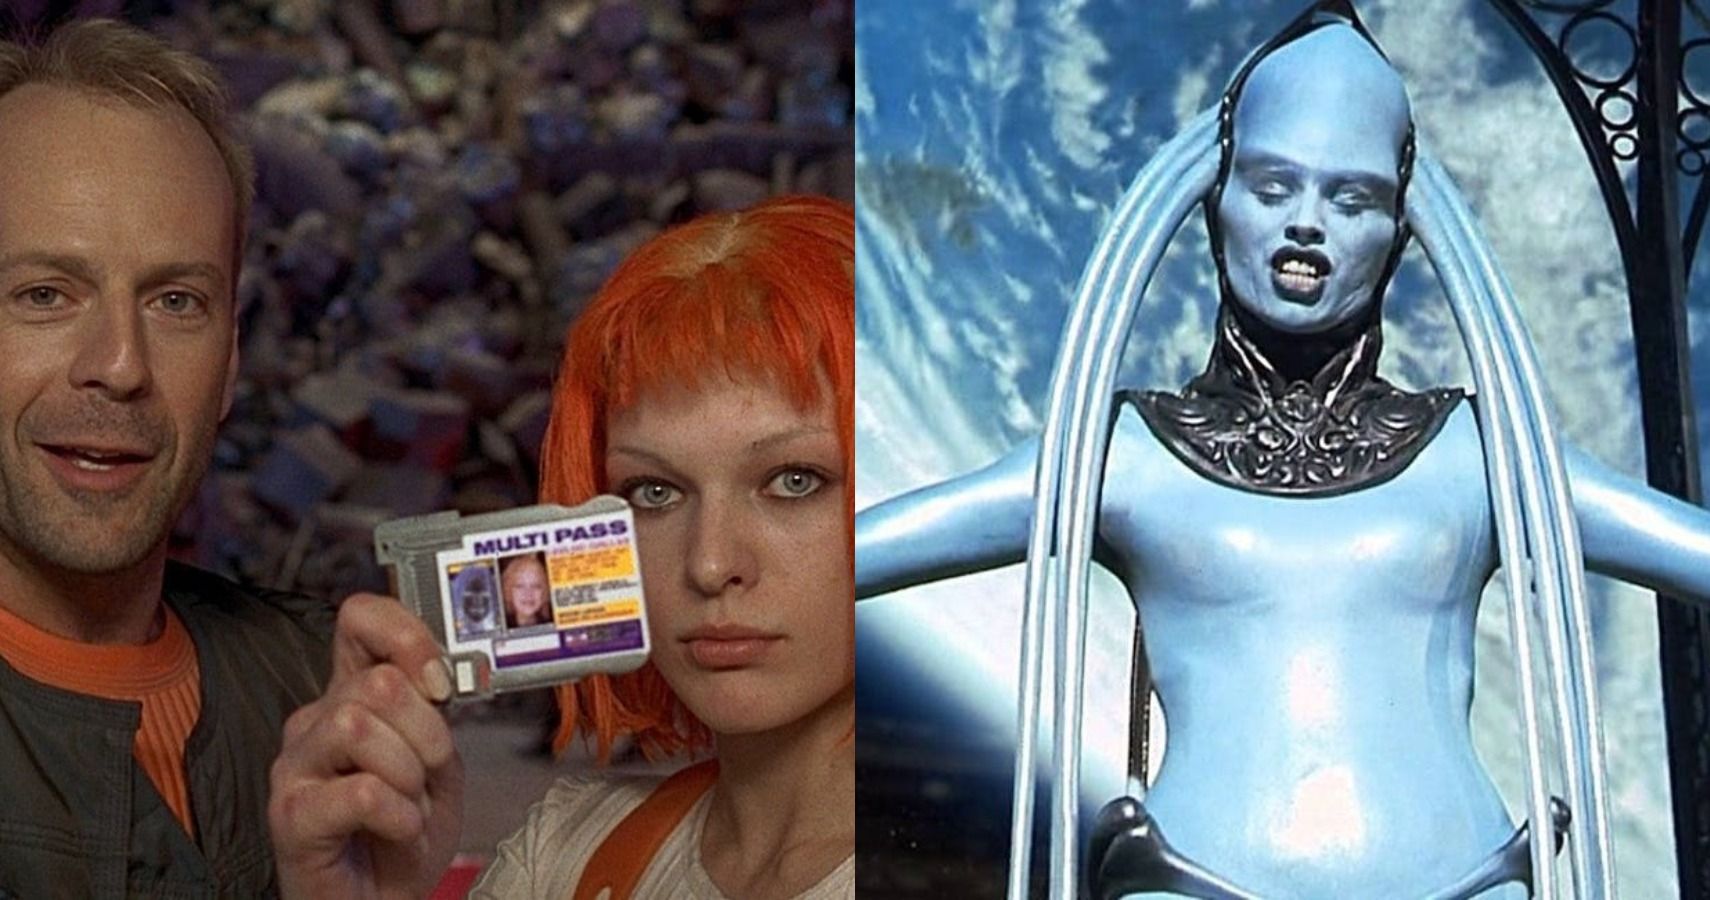 fifth element outfits